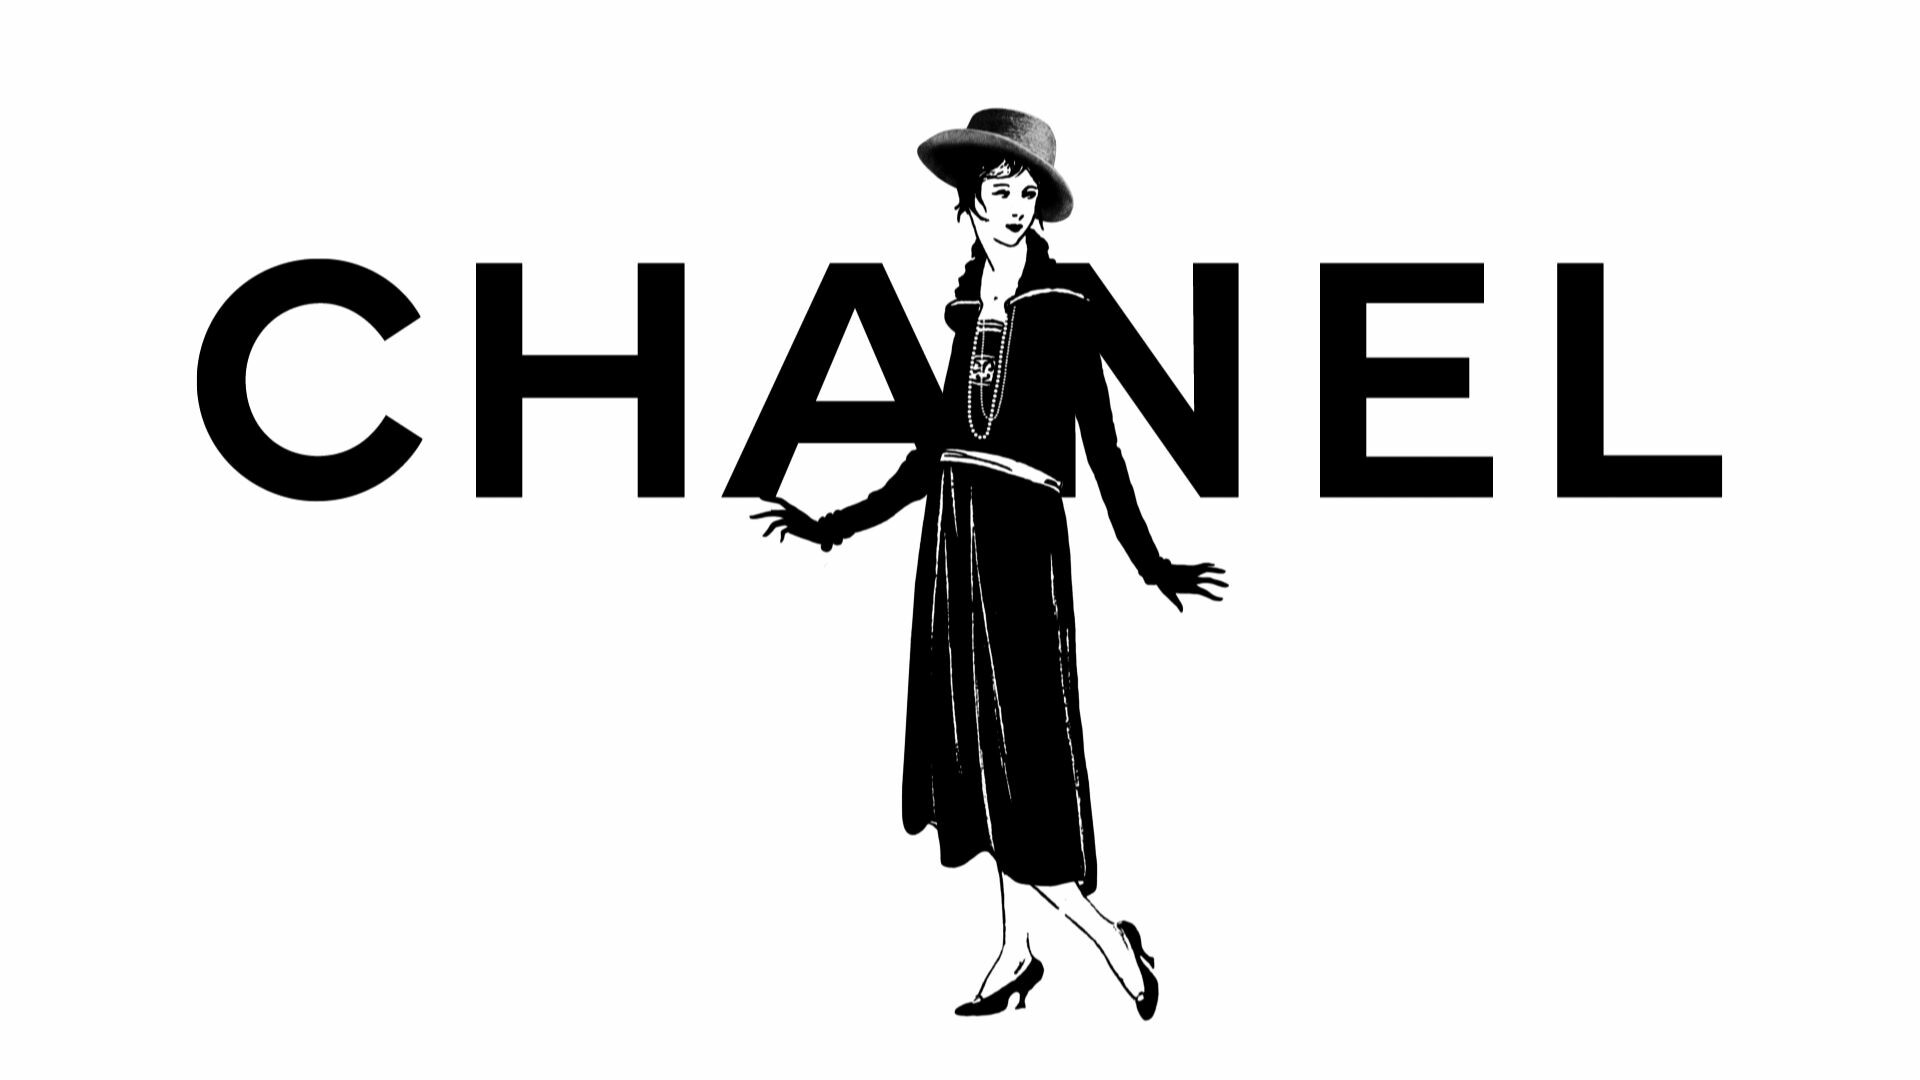 Chanel fashion, Coco Chanel wallpapers, Elegant computer backgrounds, Fashionista's choice, 1920x1080 Full HD Desktop